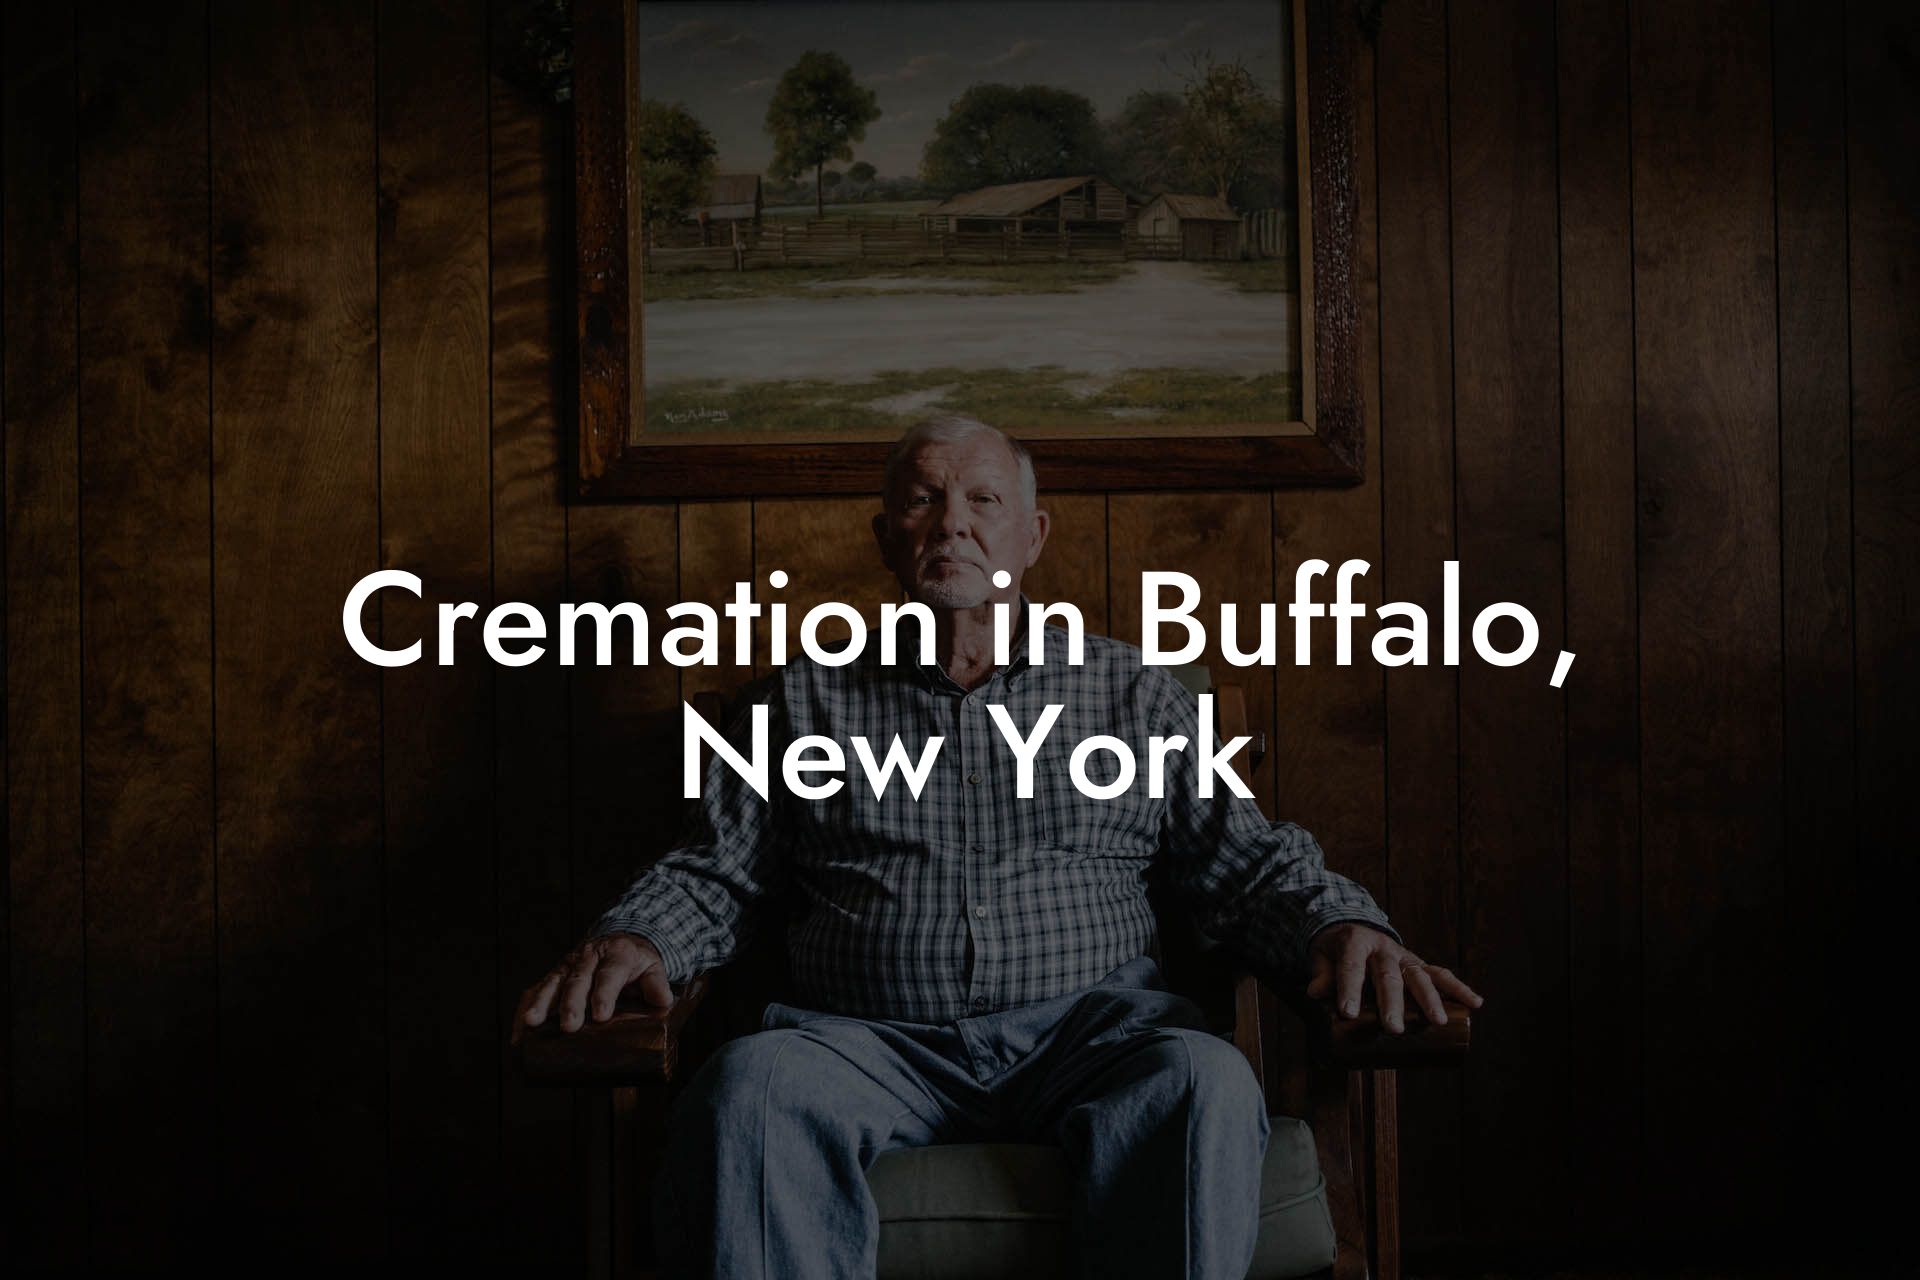 Cremation in Buffalo, New York